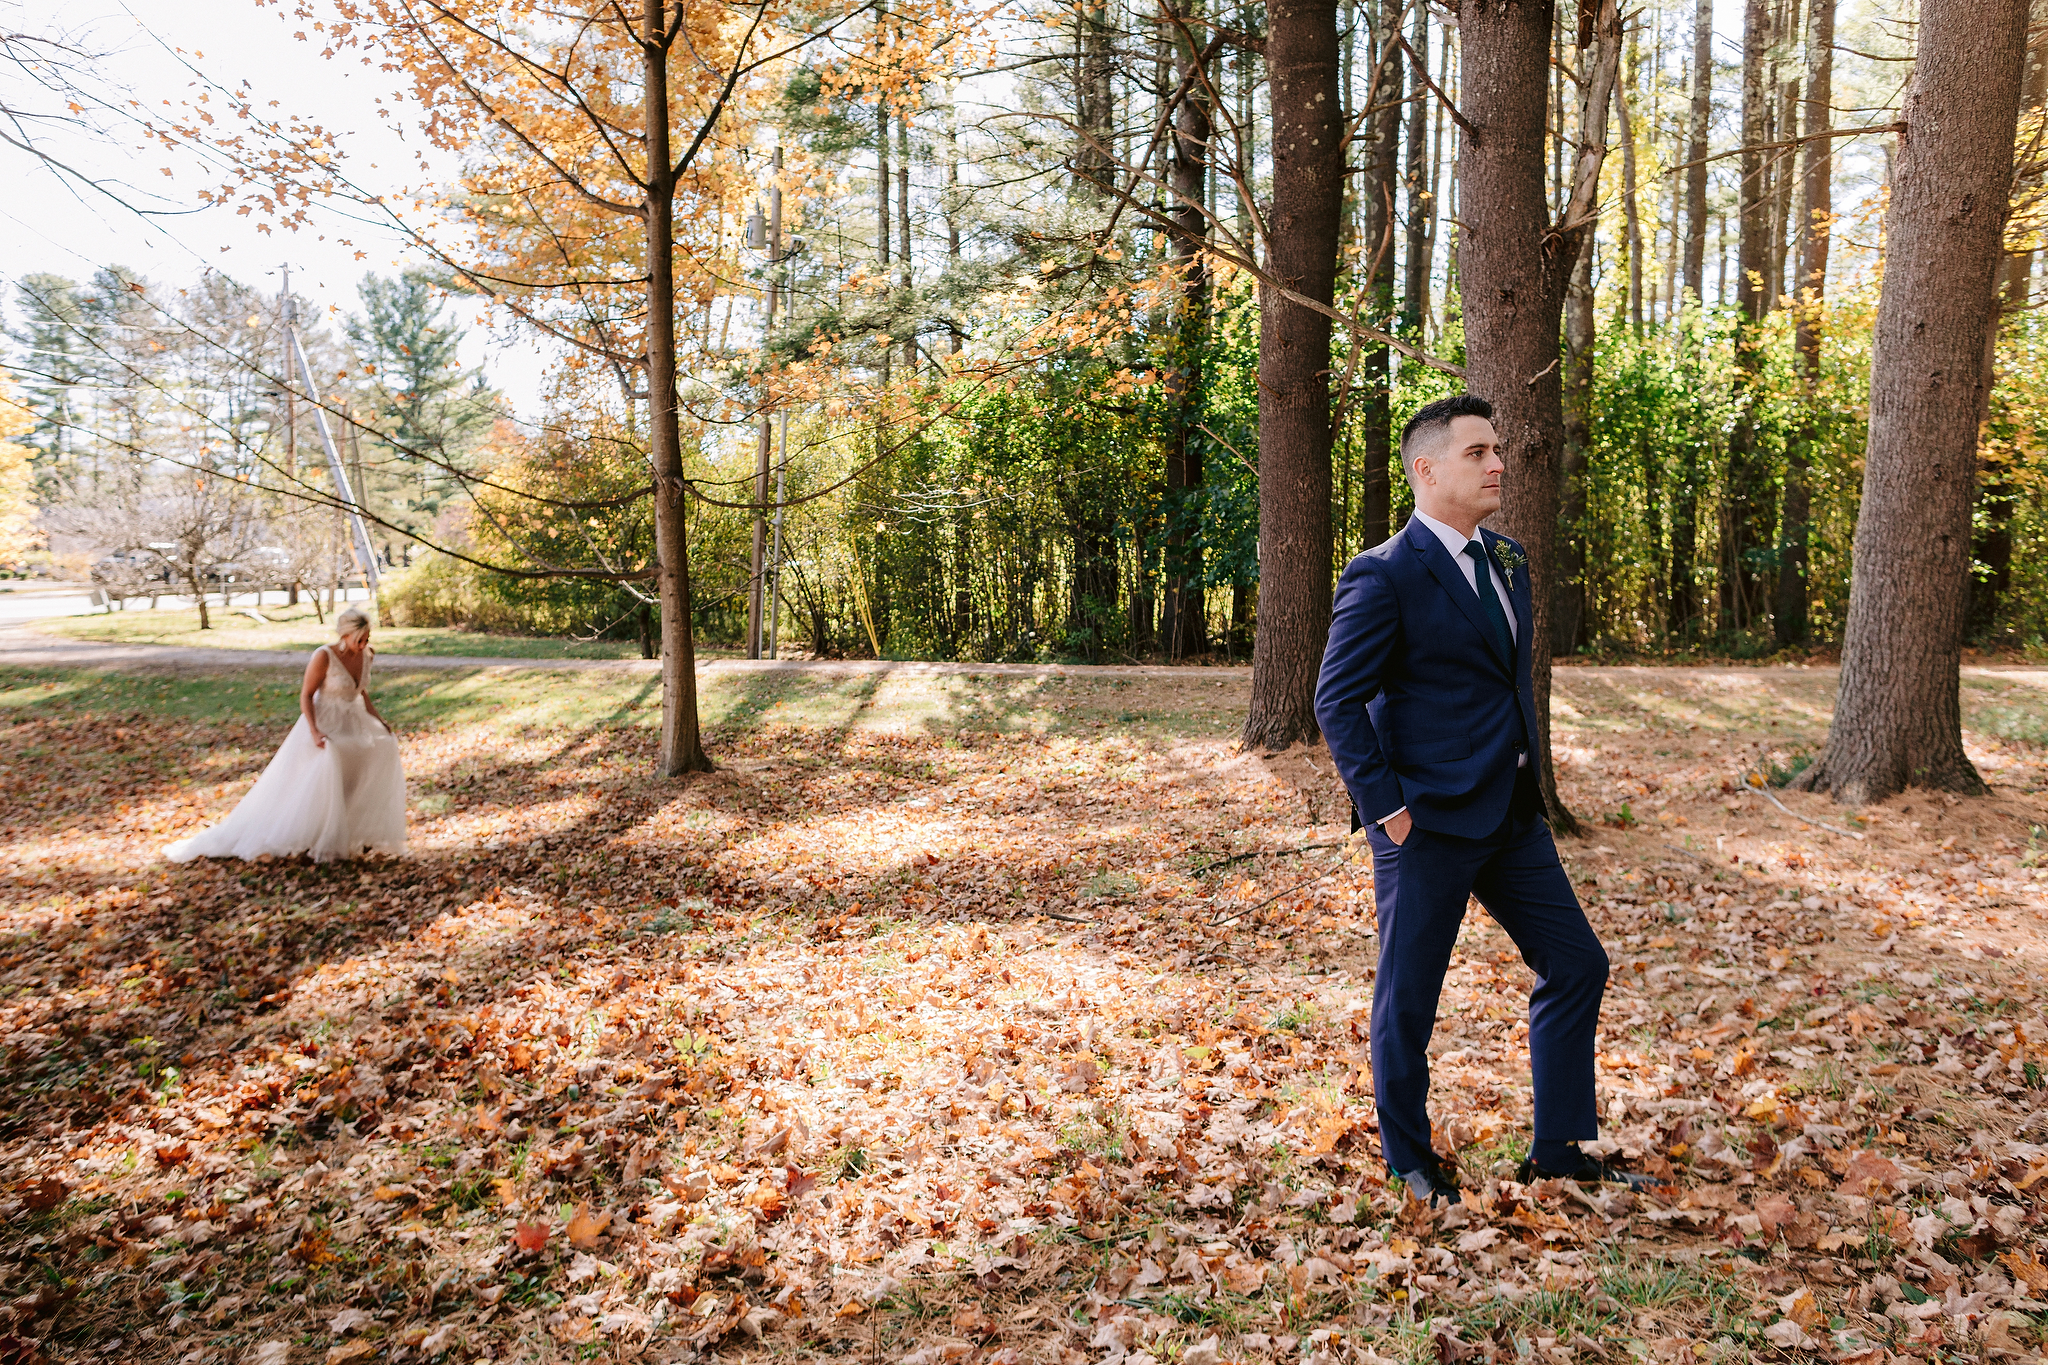 The bride and groom are posing for their First Look photo with beautiful nature in the background. Editorial destination wedding image by Jenny Fu Studio.